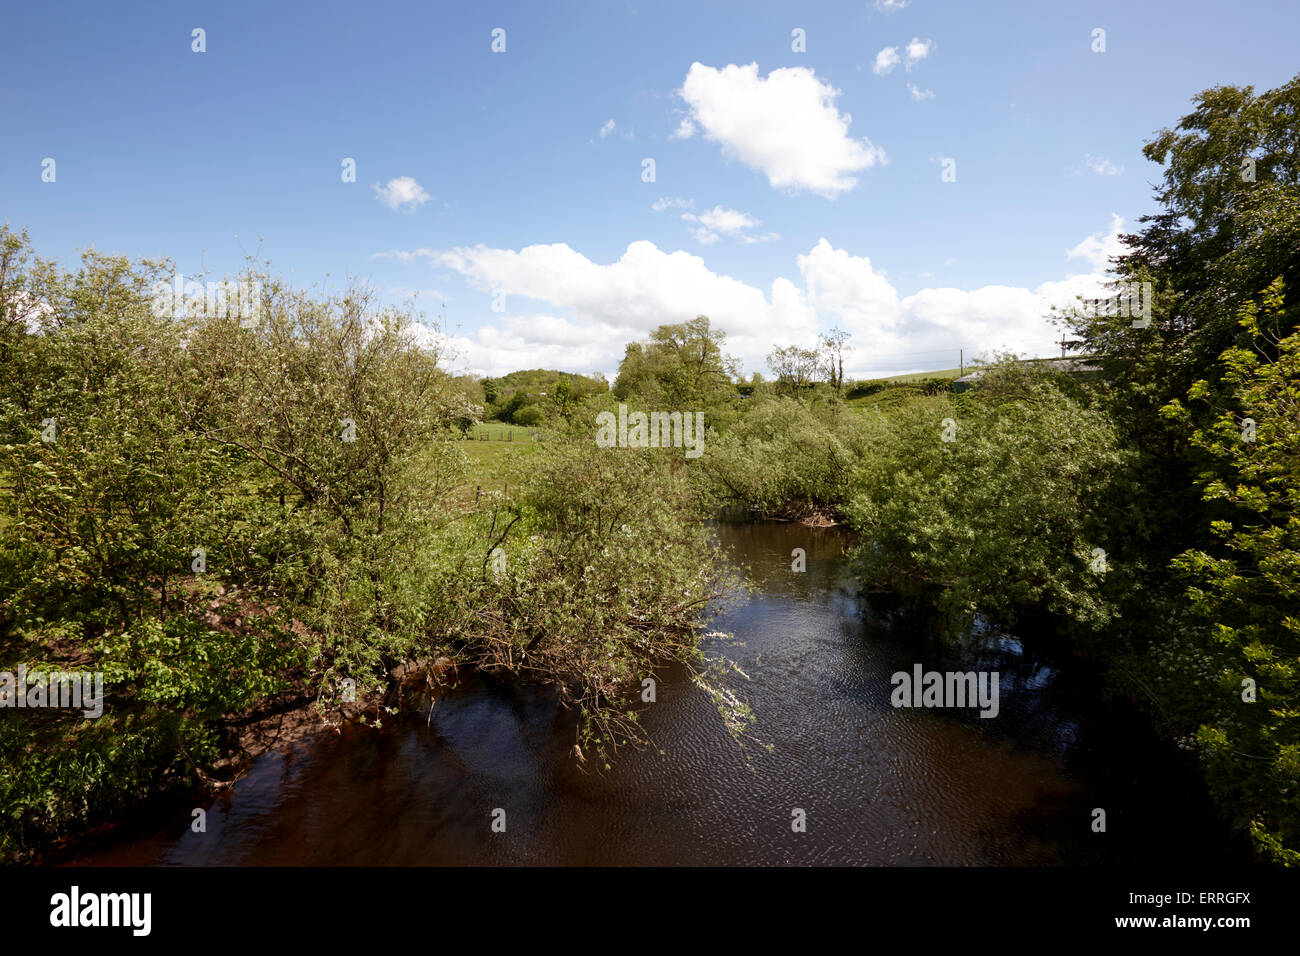 the river blackwater marking the border between county tyrone in northern ireland on the left and county monaghan in the republi Stock Photo